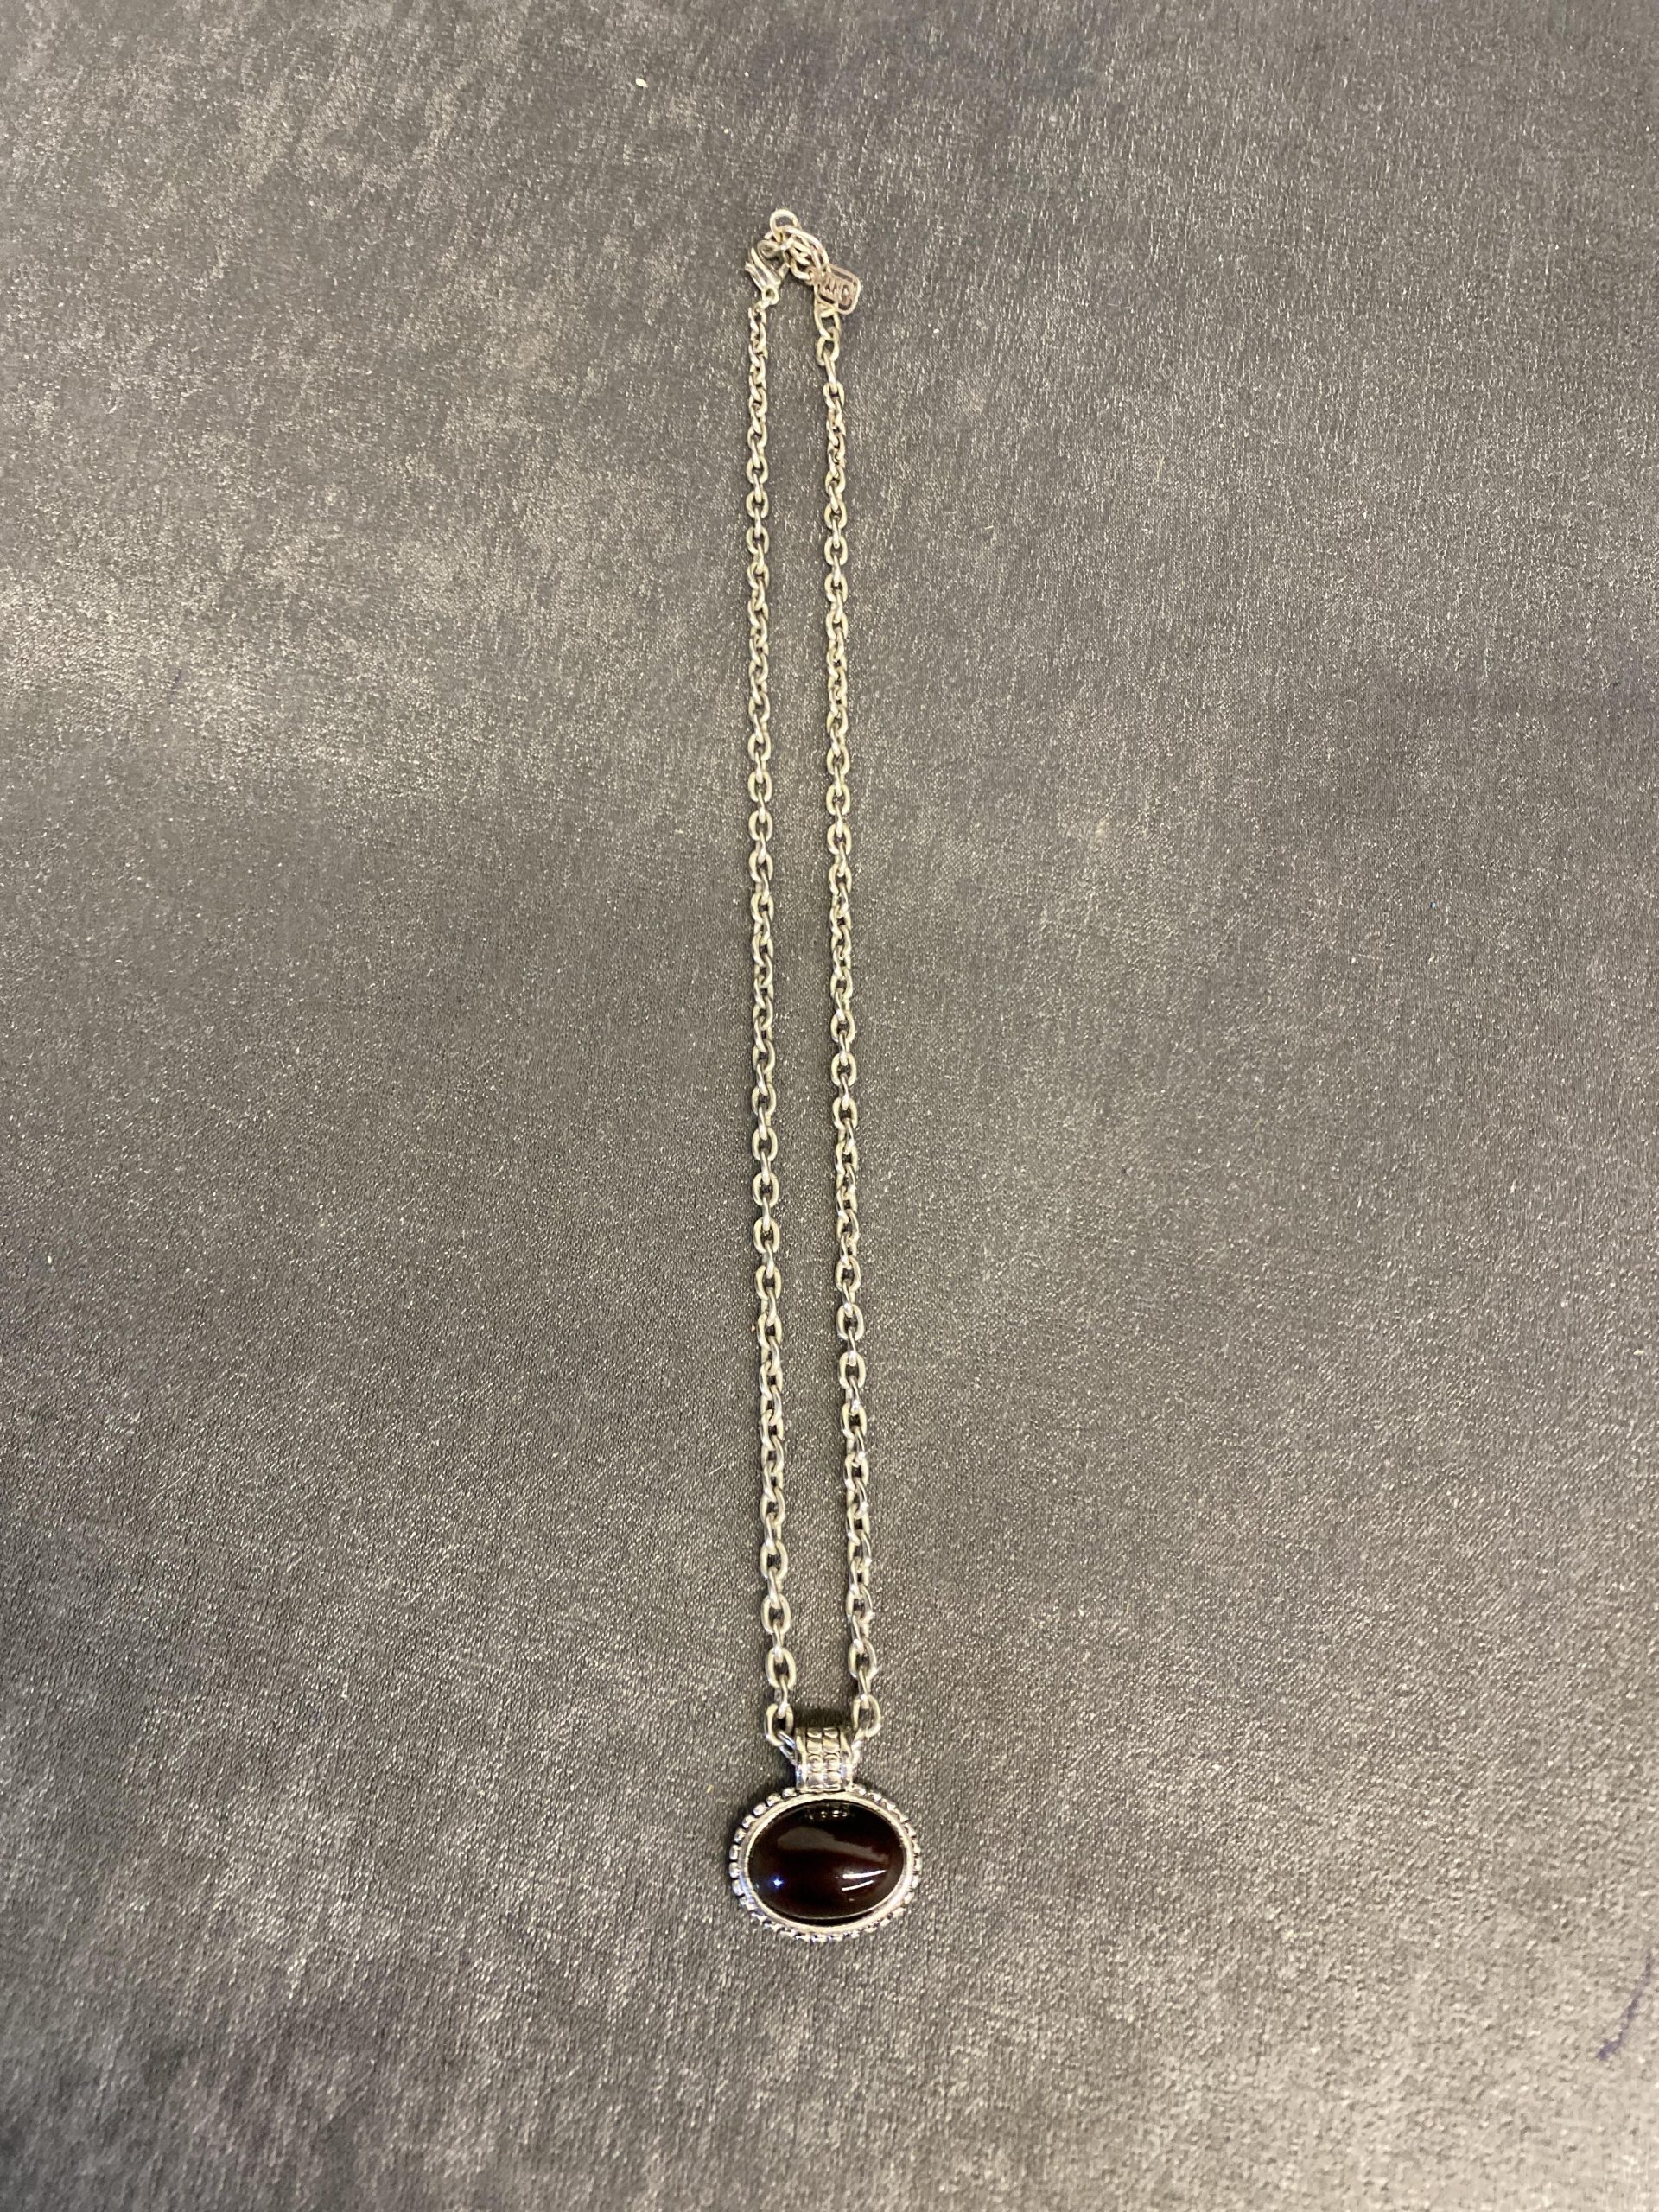 Necklace – Silvertone with Stone Pendant